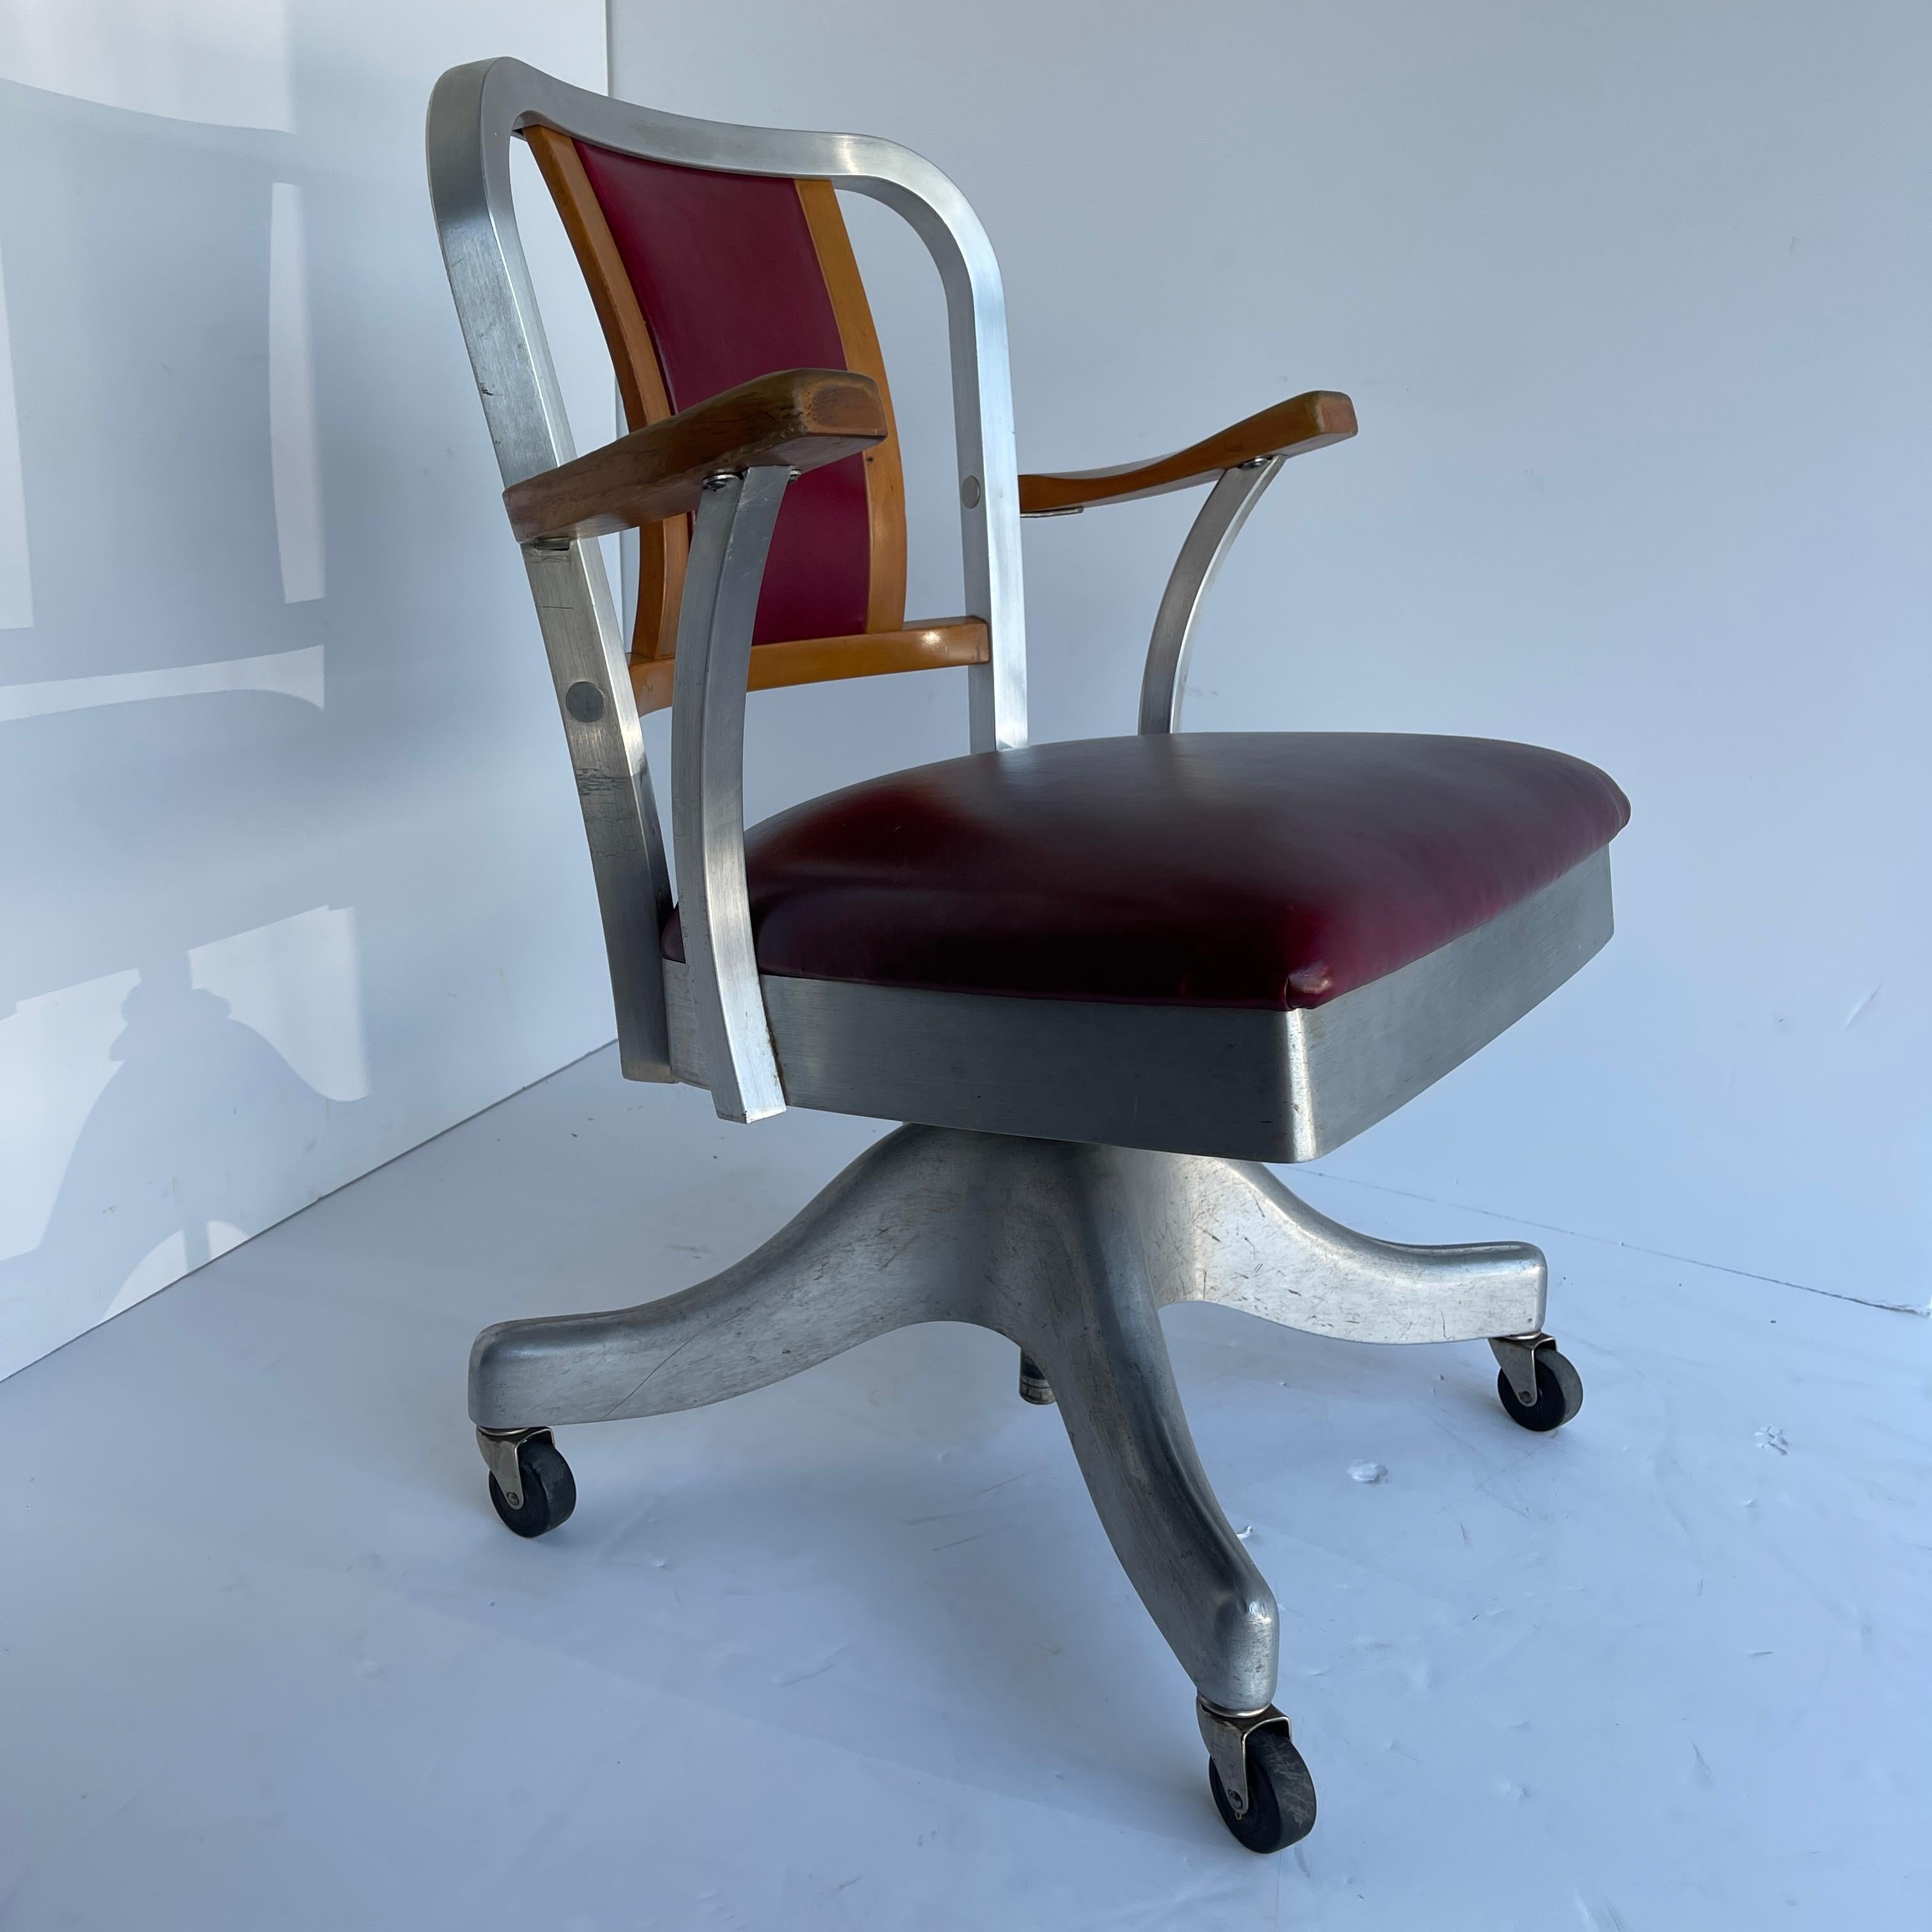 Mid-Century Modern desk chair, by Shaw Walker in aluminum and red leather.
This chair is a beauty! The newly reupholstered butter soft burgundy leather on the back and seat make this solid chair elegant and stylish. The chair swivels smoothly.